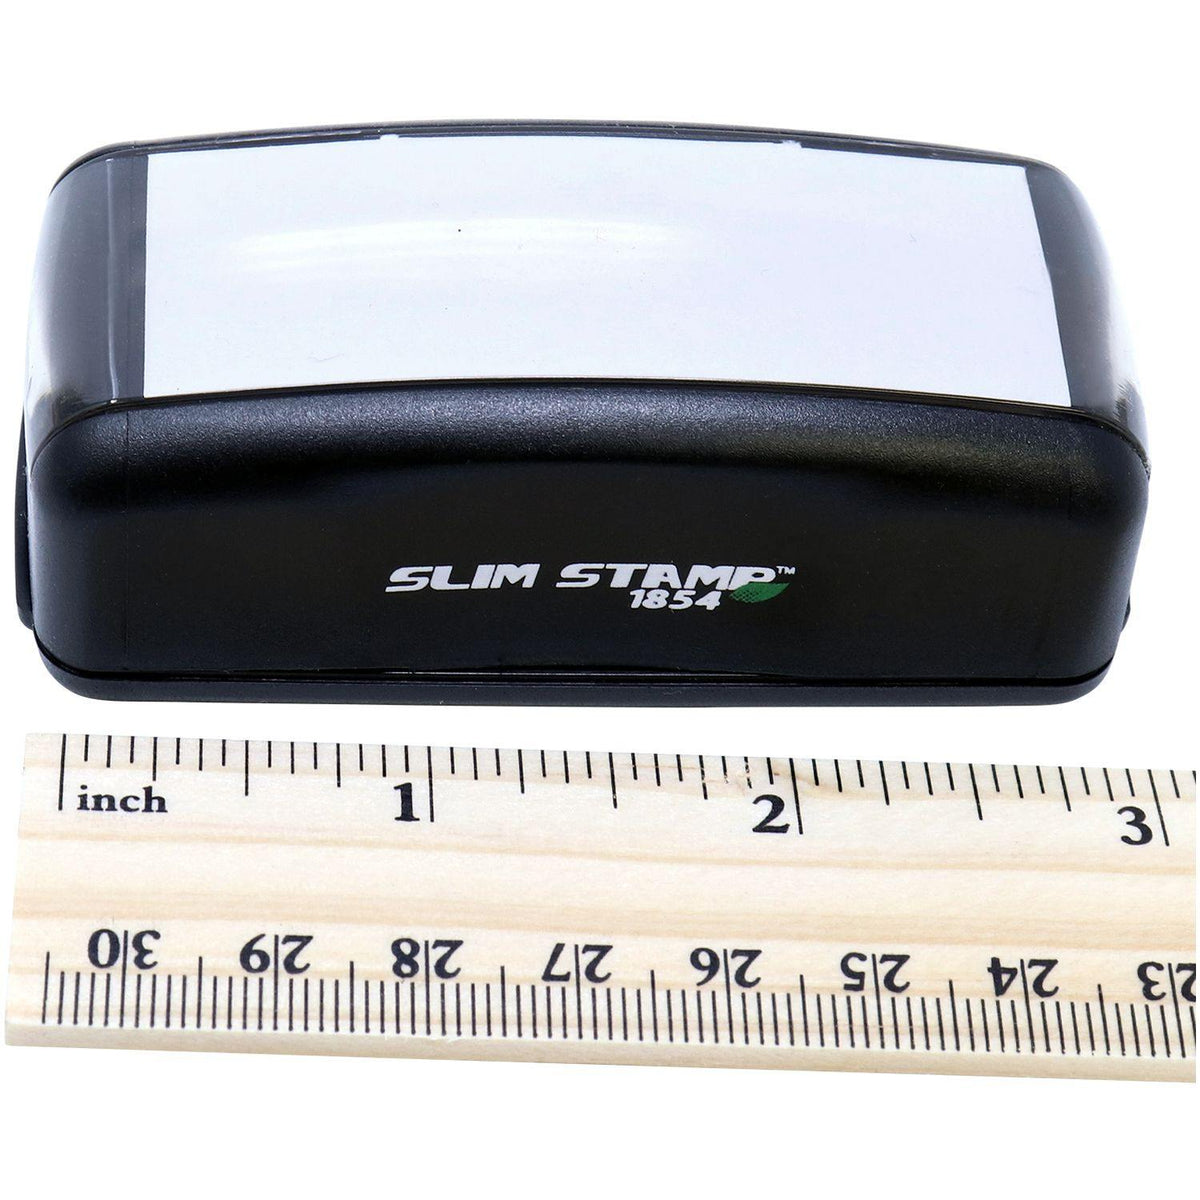 Measurement Large Pre-Inked Narrow Font Court Copy Stamp with Ruler